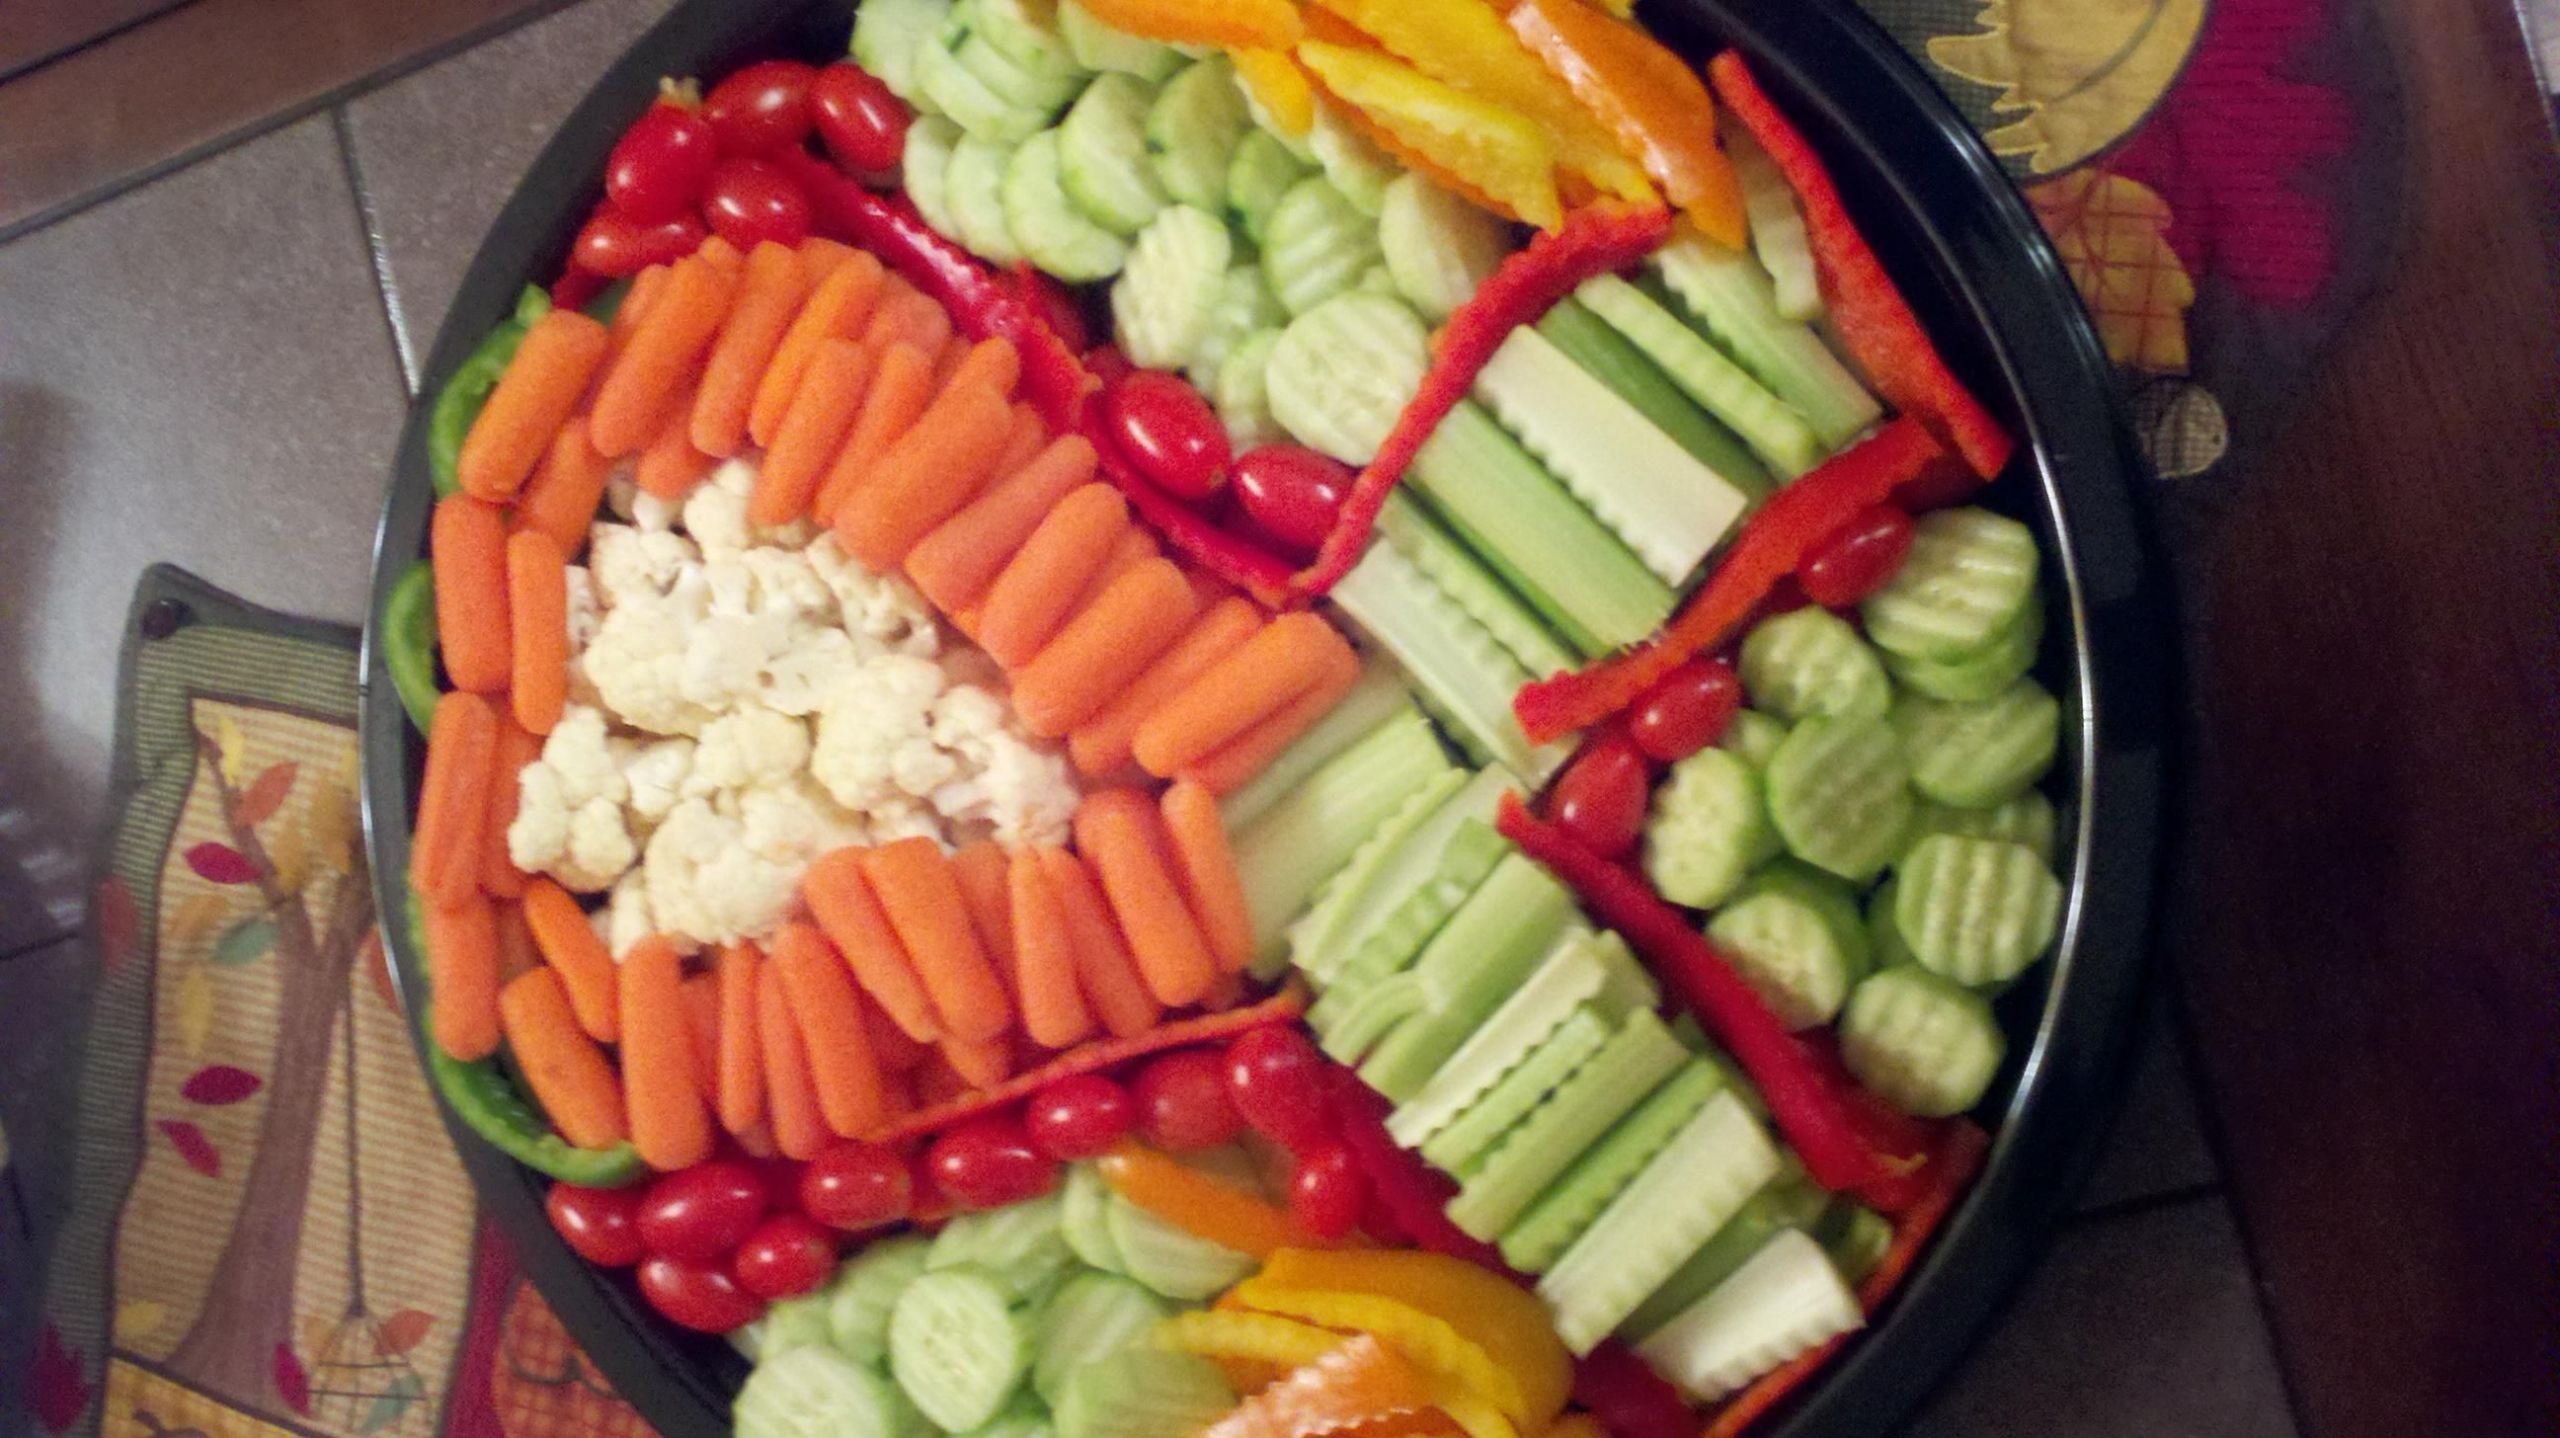 Pink Food Ideas For Breast Cancer Party
 Veggie tray